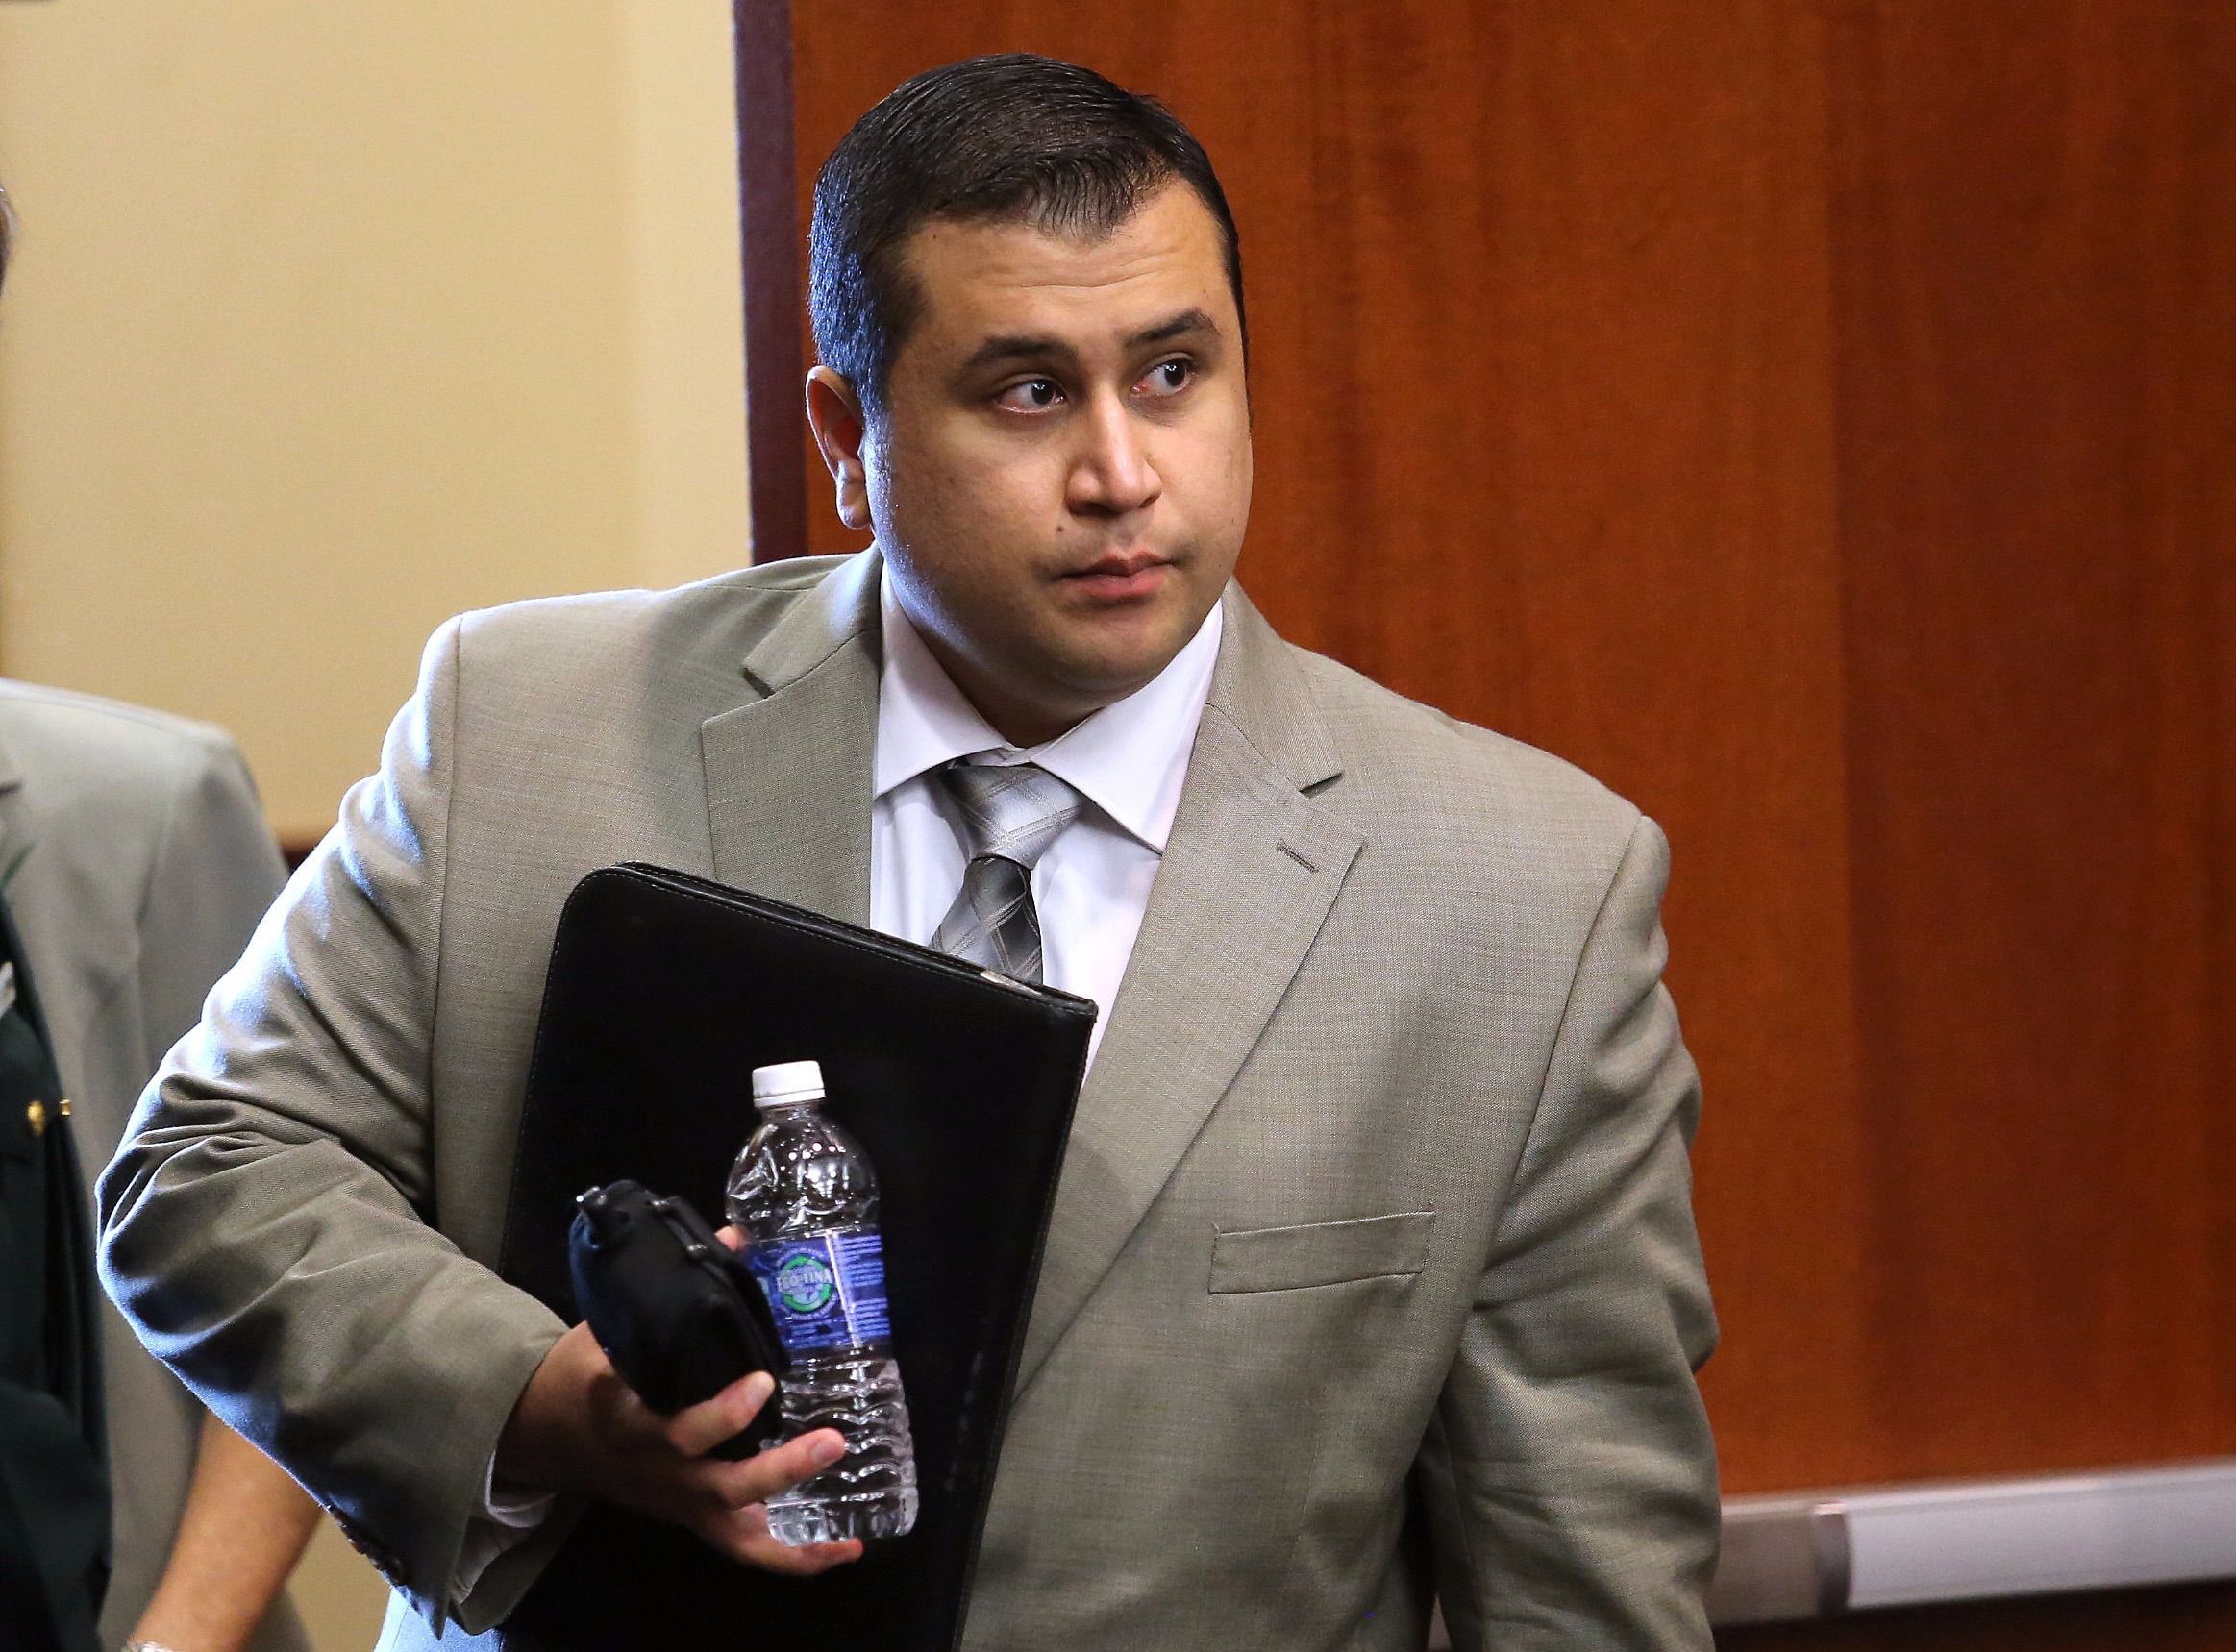 George Zimmerman arrives in the courtroom for the 21st day of his trial.